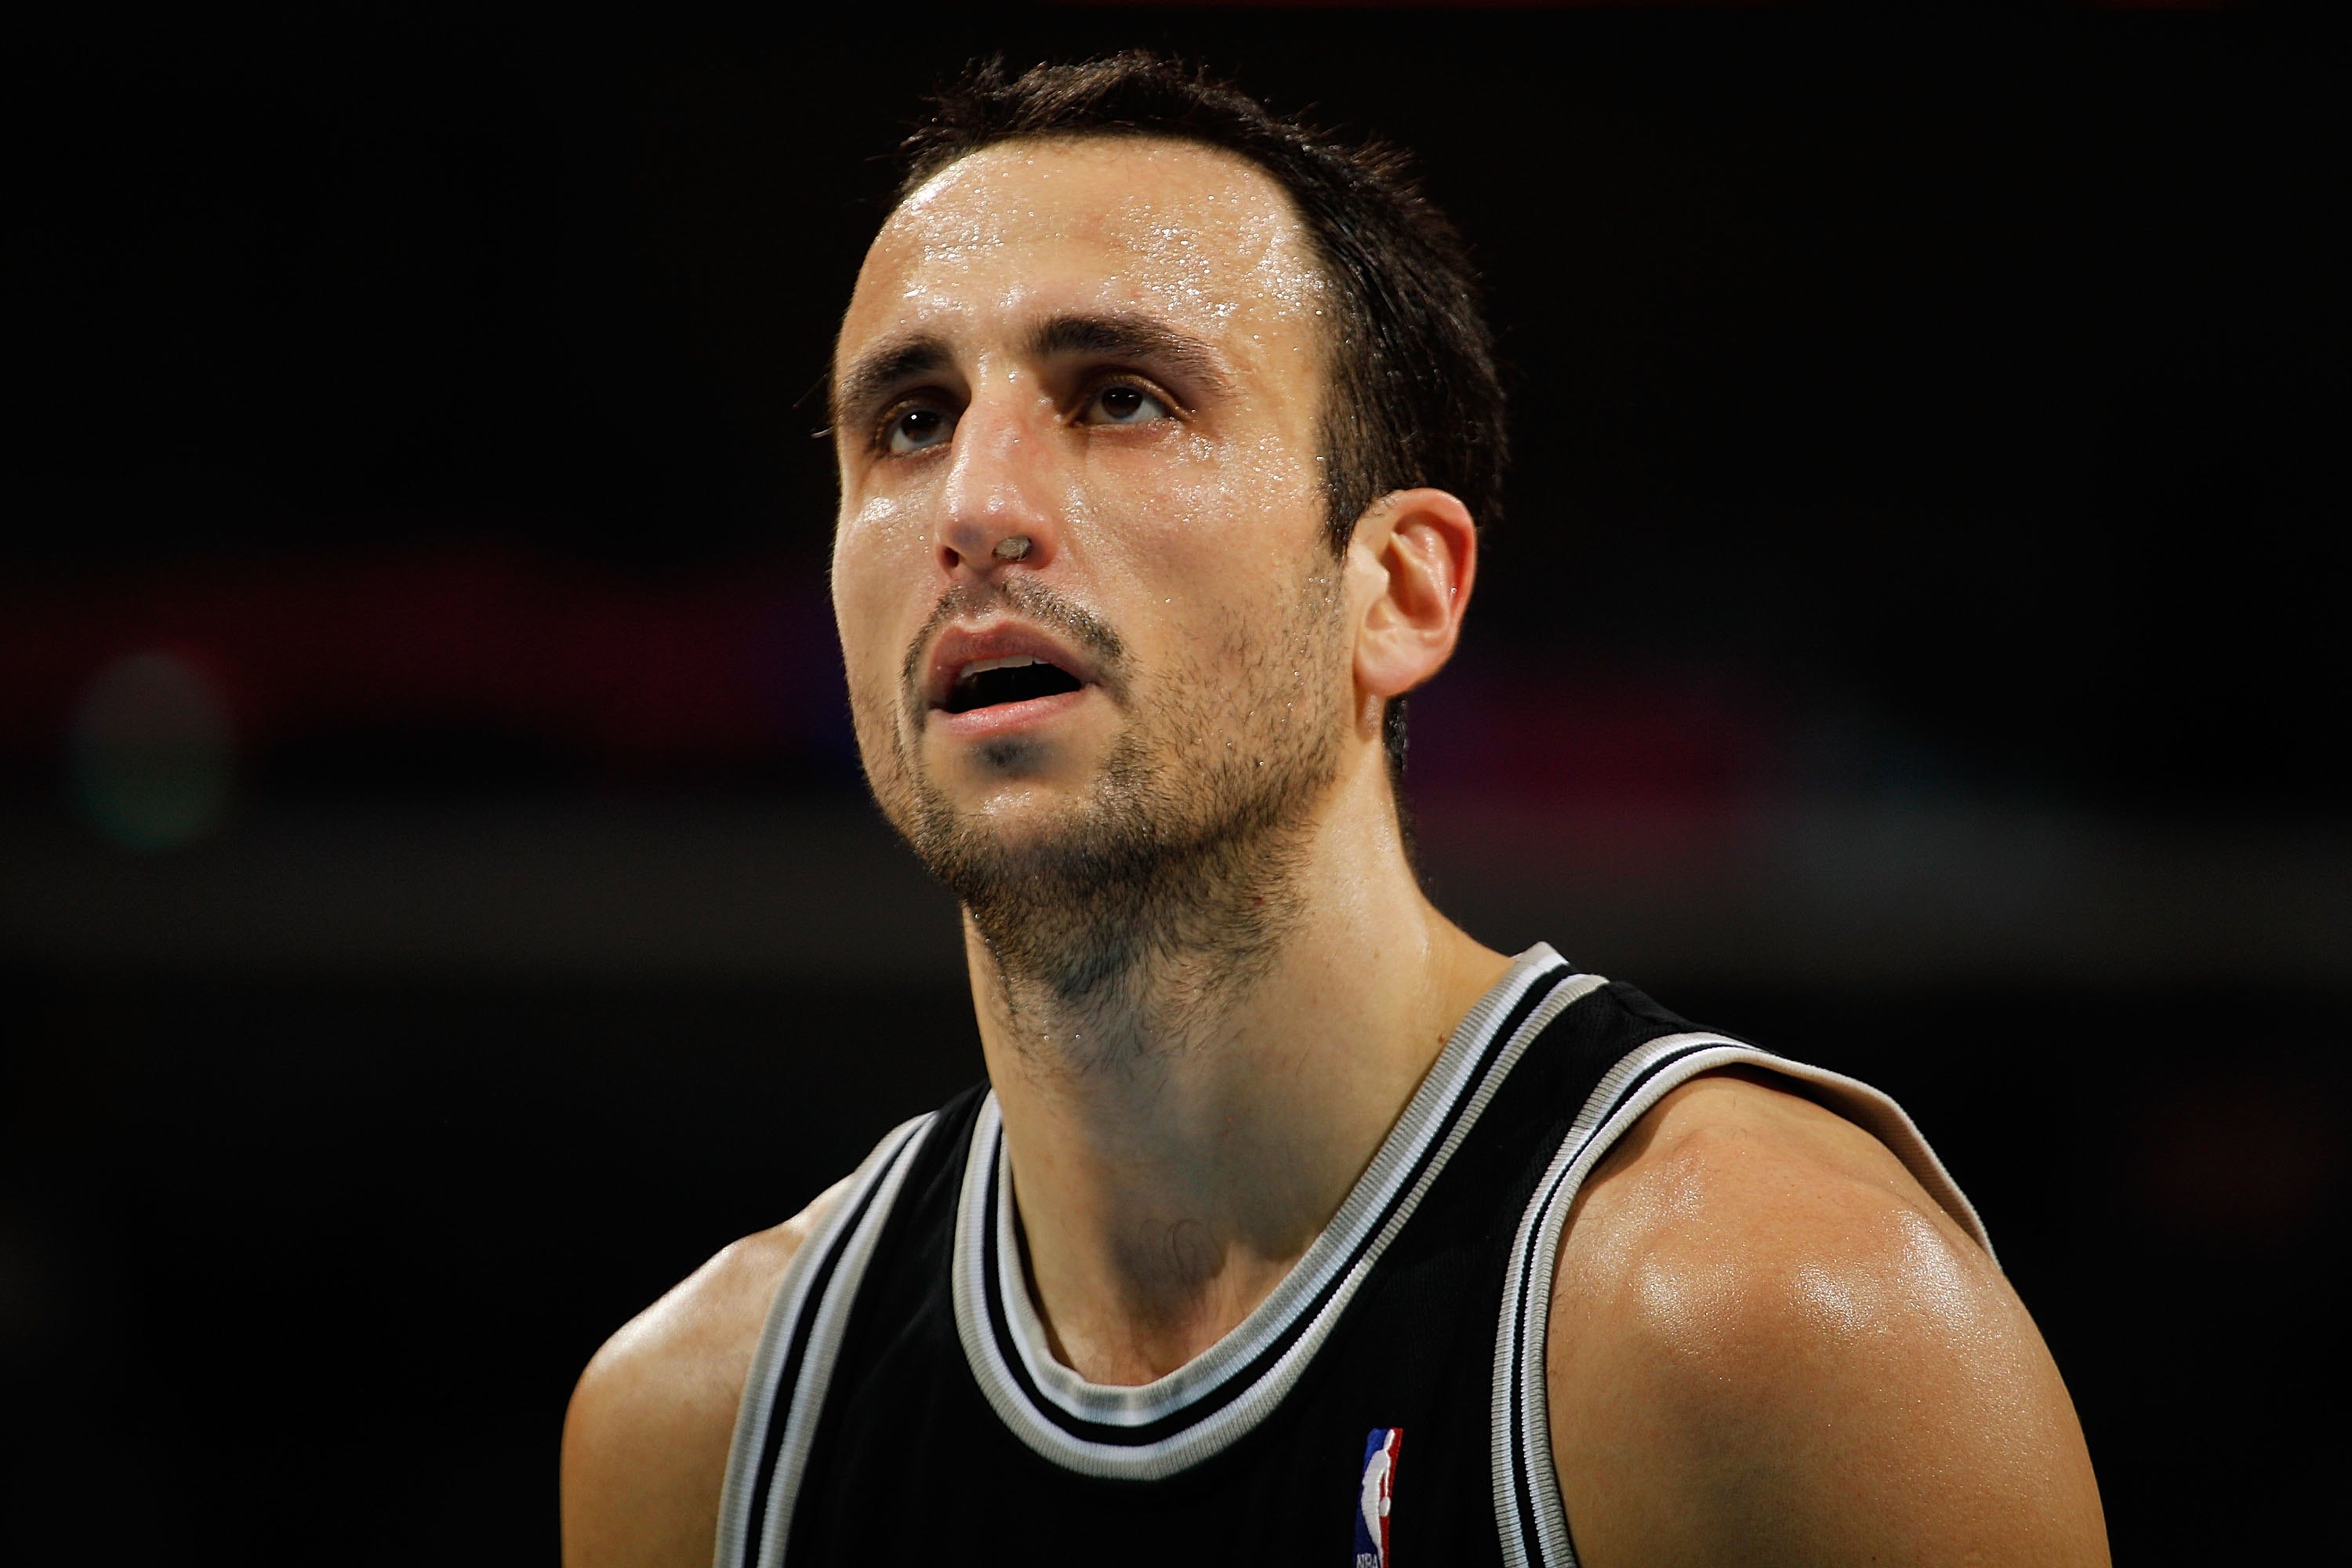 NEW ORLEANS - JANUARY 18:  Manu Ginobili #20 of the San Antonio Spurs during the game against the New Orleans Hornets at New Orleans Arena on January 18, 2010 in New Orleans, Louisiana.   NOTE TO USER: User expressly acknowledges and agrees that, by downl